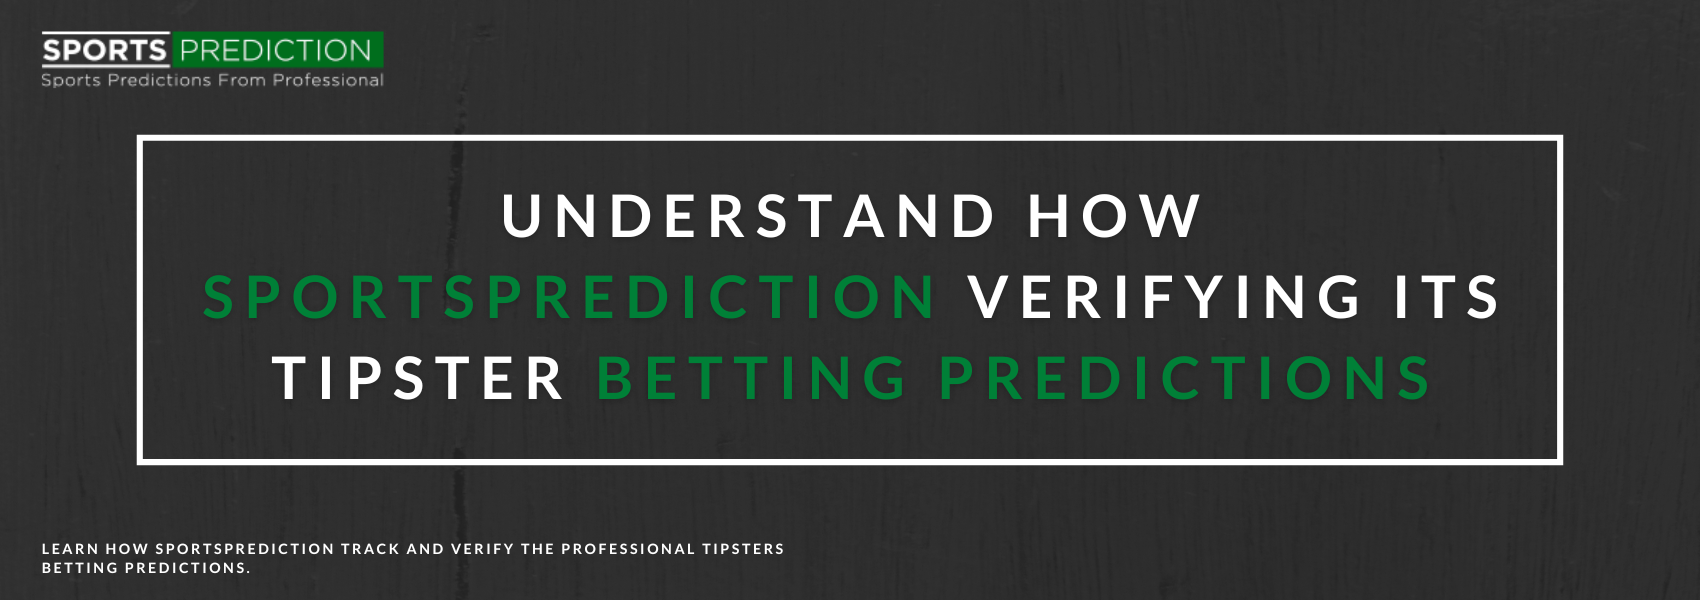 Understand How Sportsprediction Verifying Its Tipster Betting Predictions